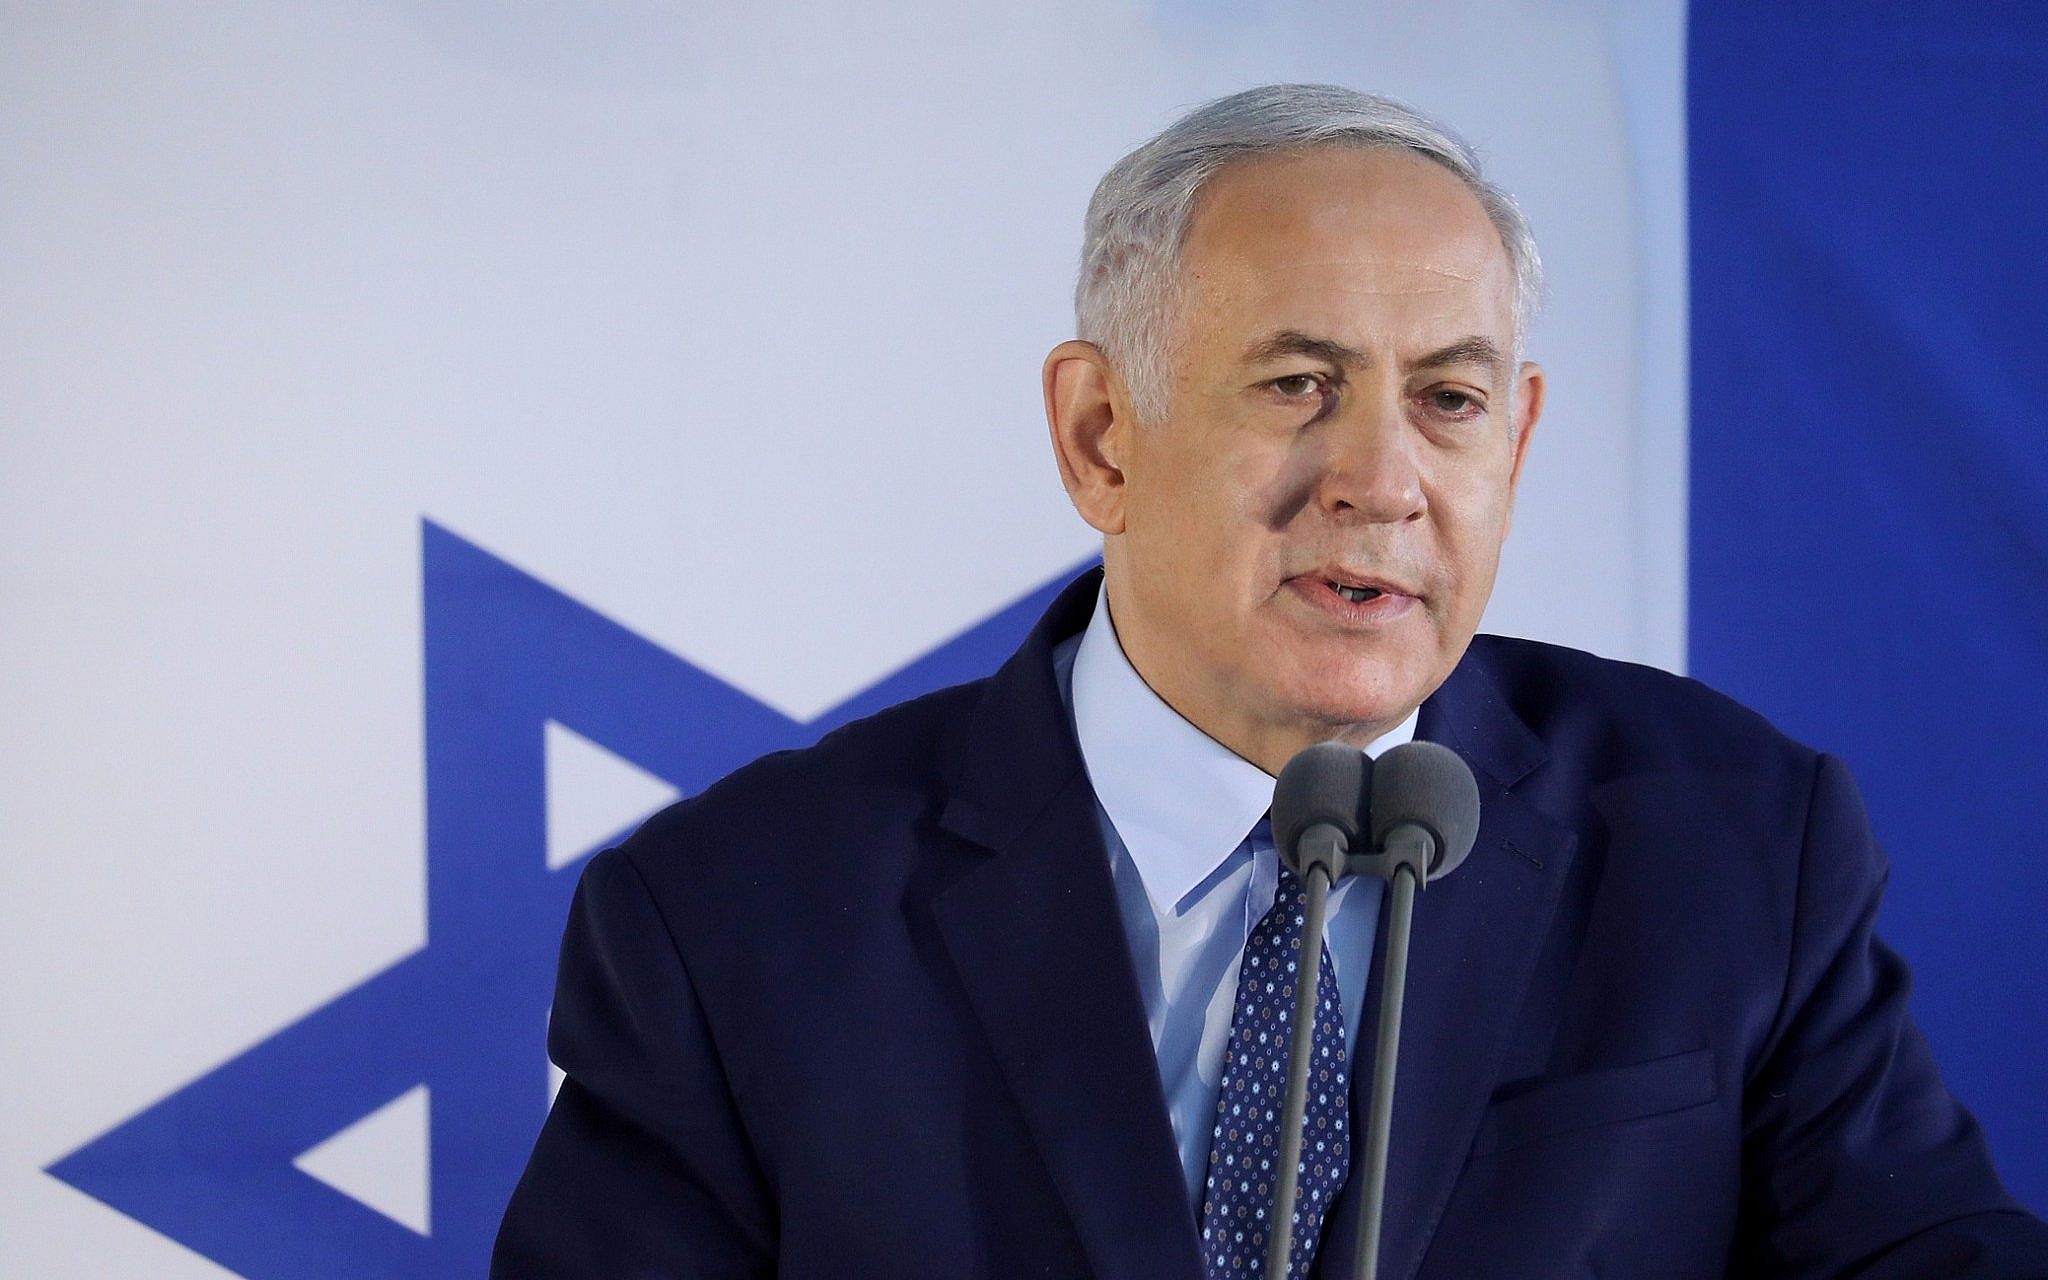 Netanyahu resubmits request to let his wealthy benefactors cover his ...